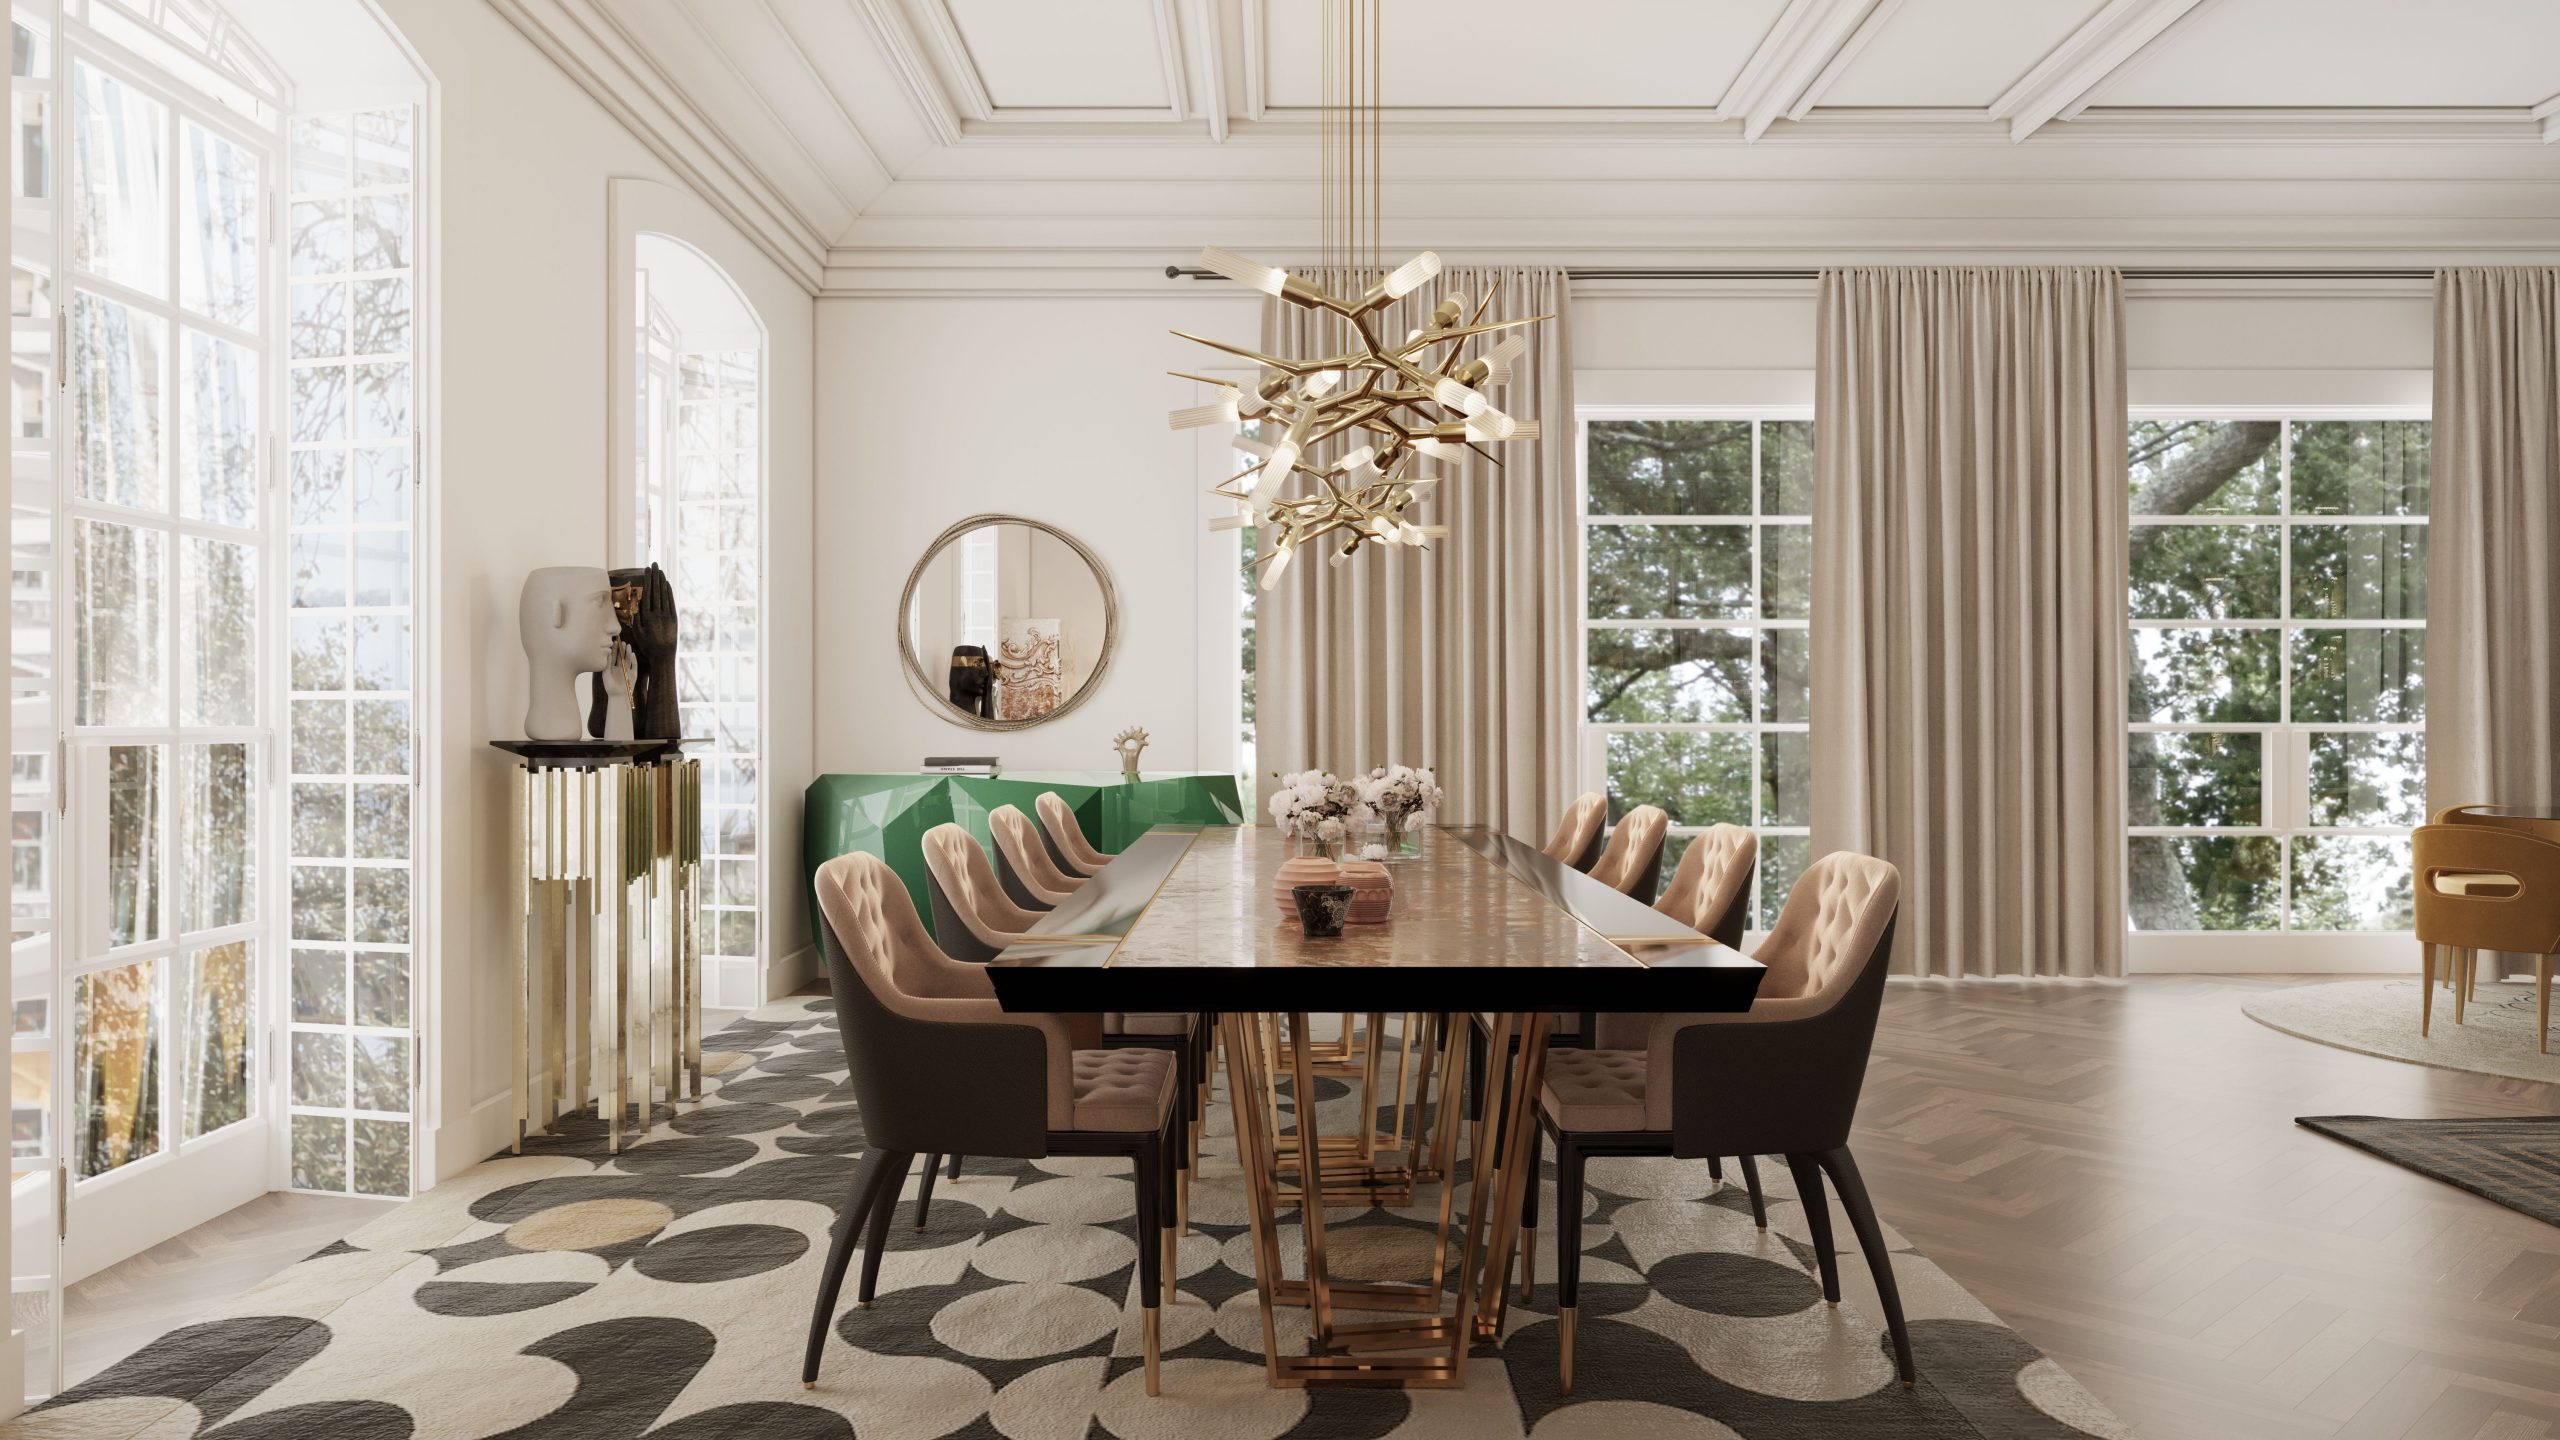 Exquisite modern dining room with Yarsa Rug, hanging gold lights and dining chairs paired with dining table